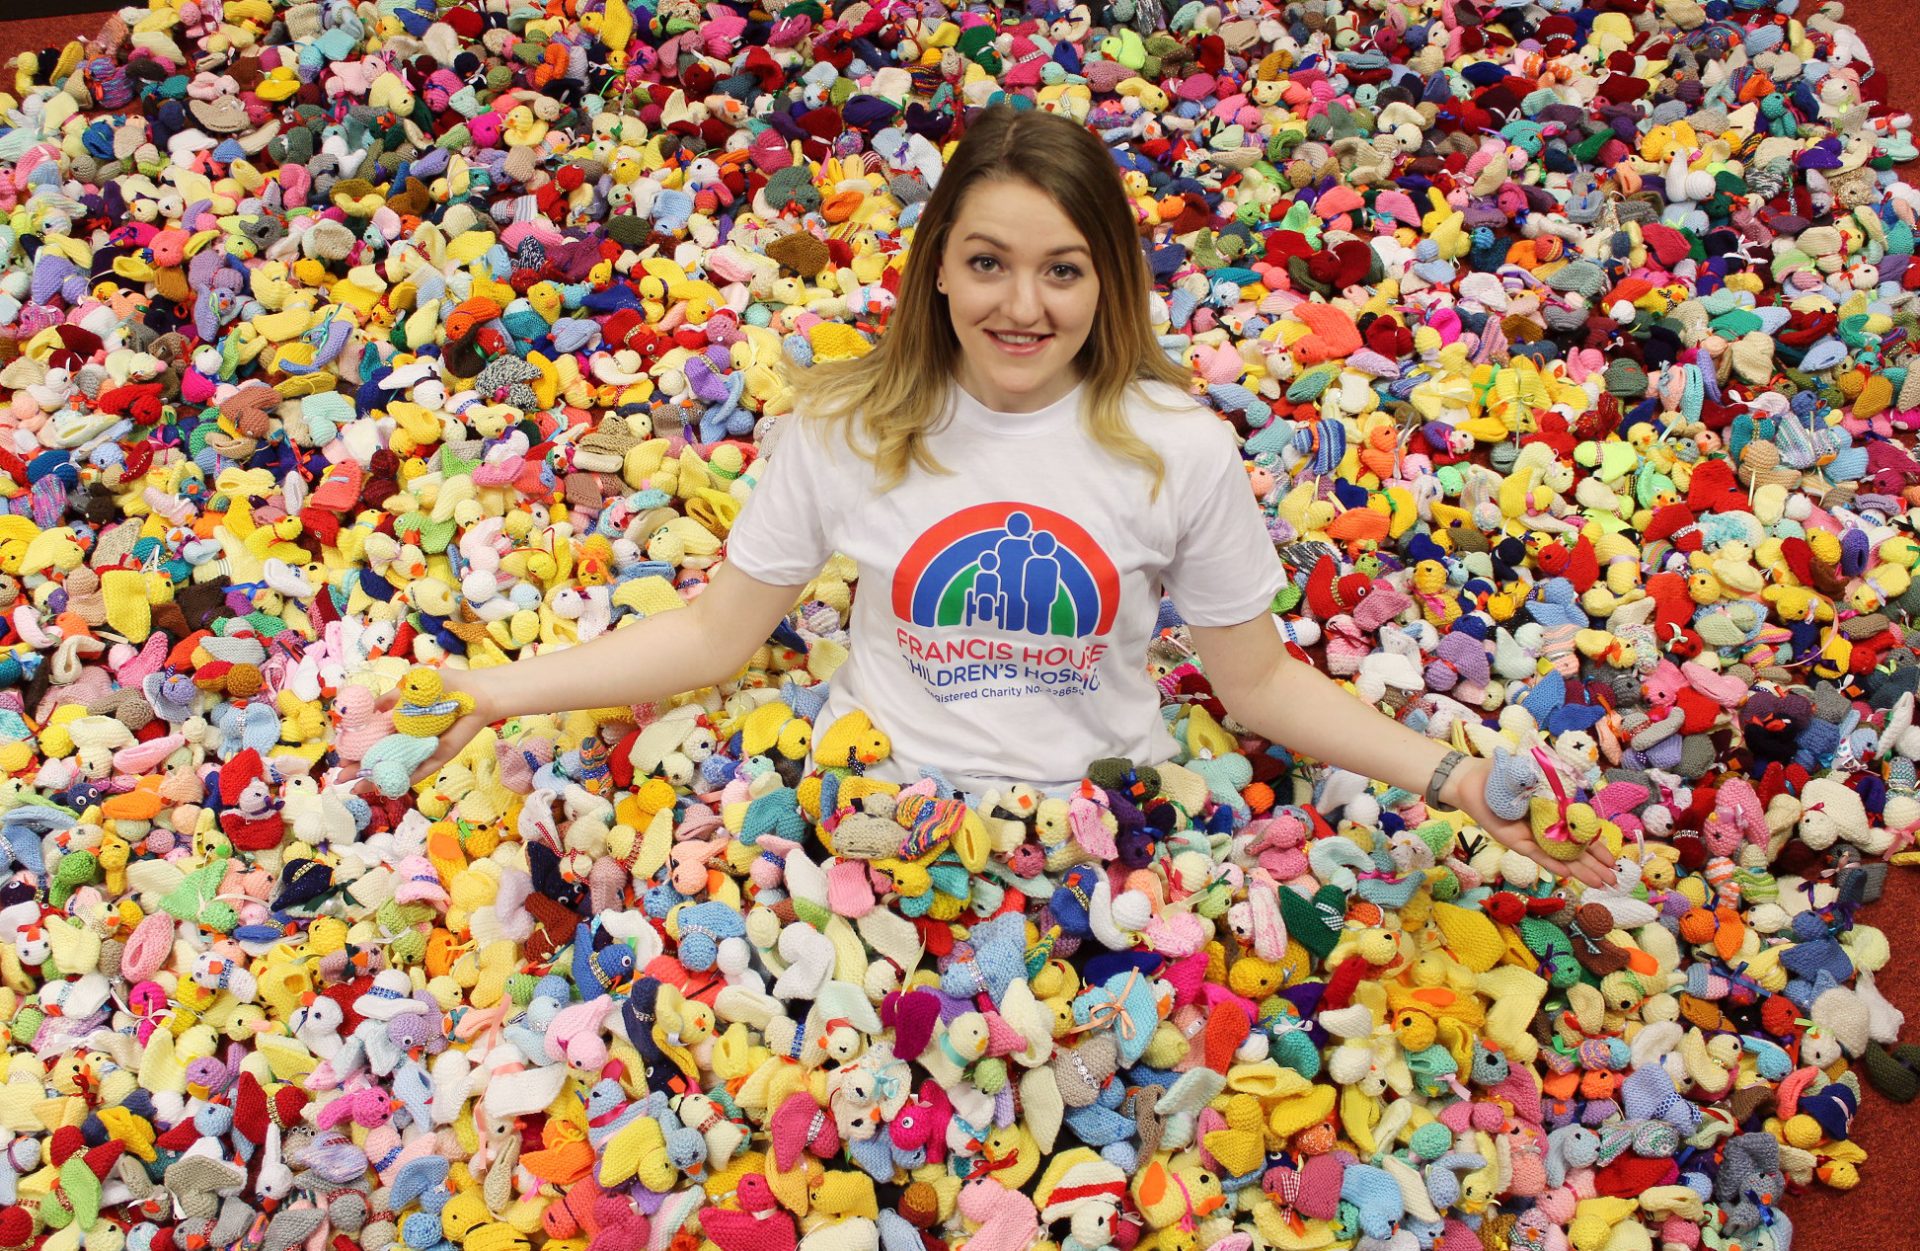 Rachel Astill, Francis House fundraiser, with thousands of knitted chicks